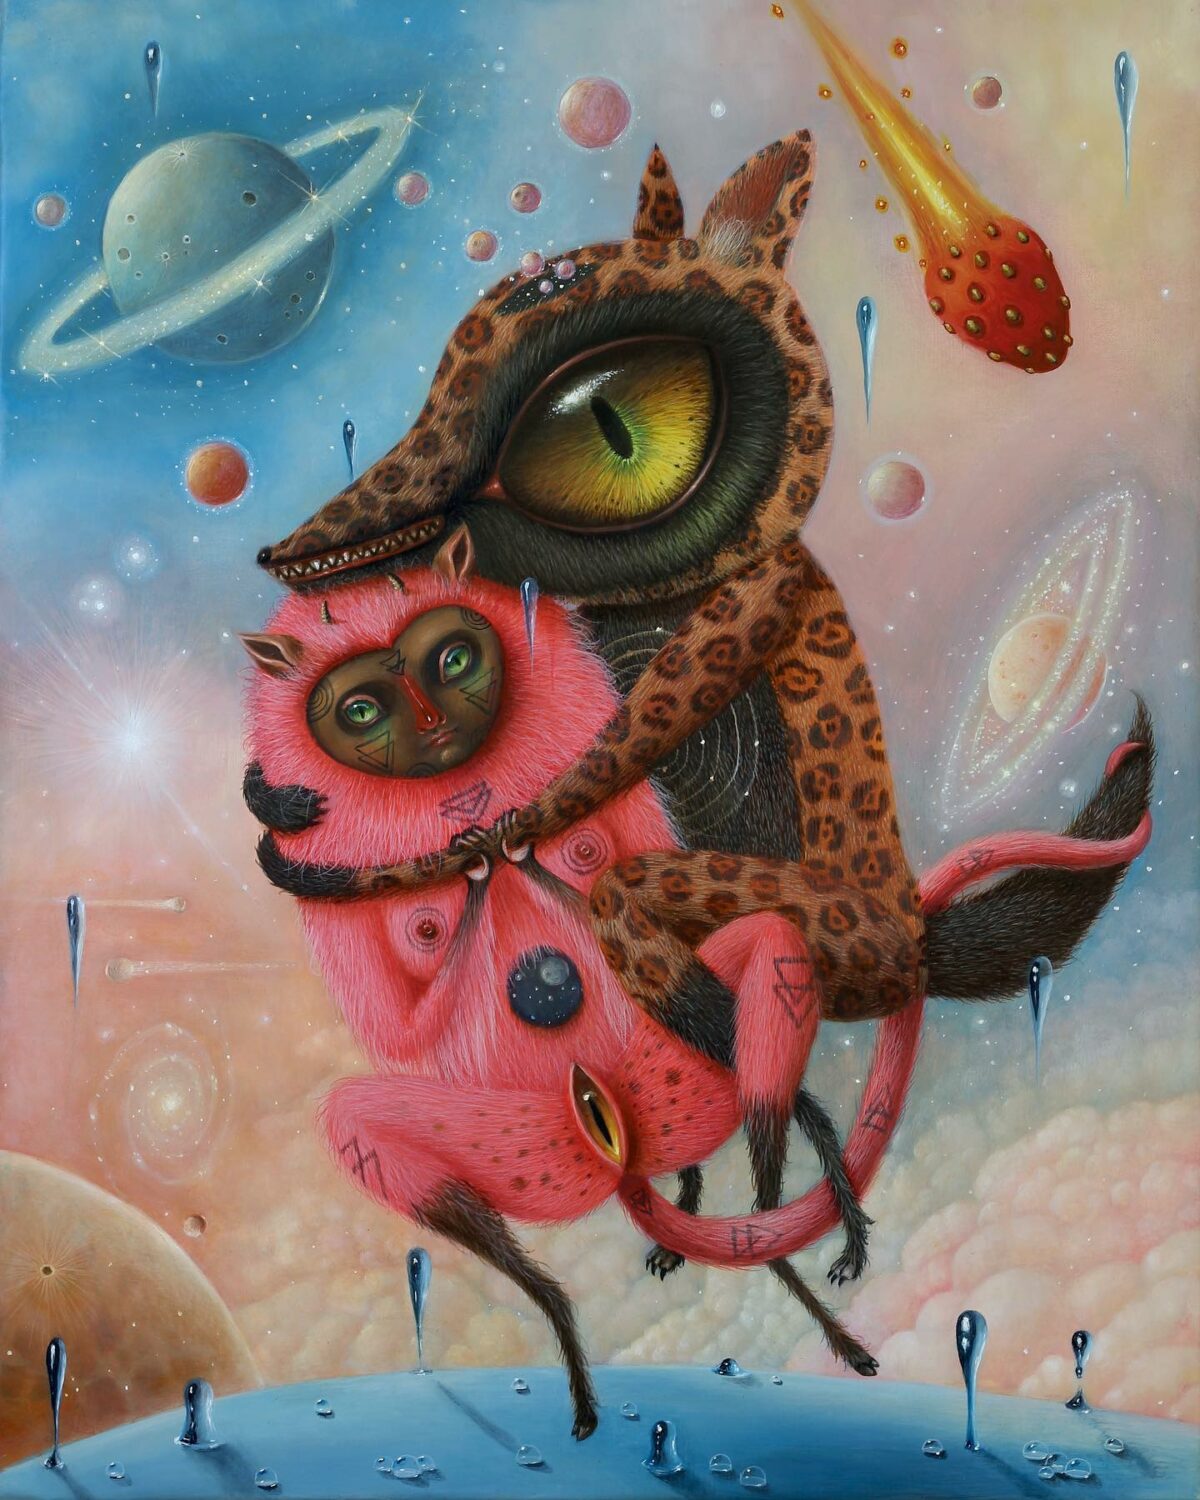 Lovely Paintings Of Quirky Creatures By Peca 2